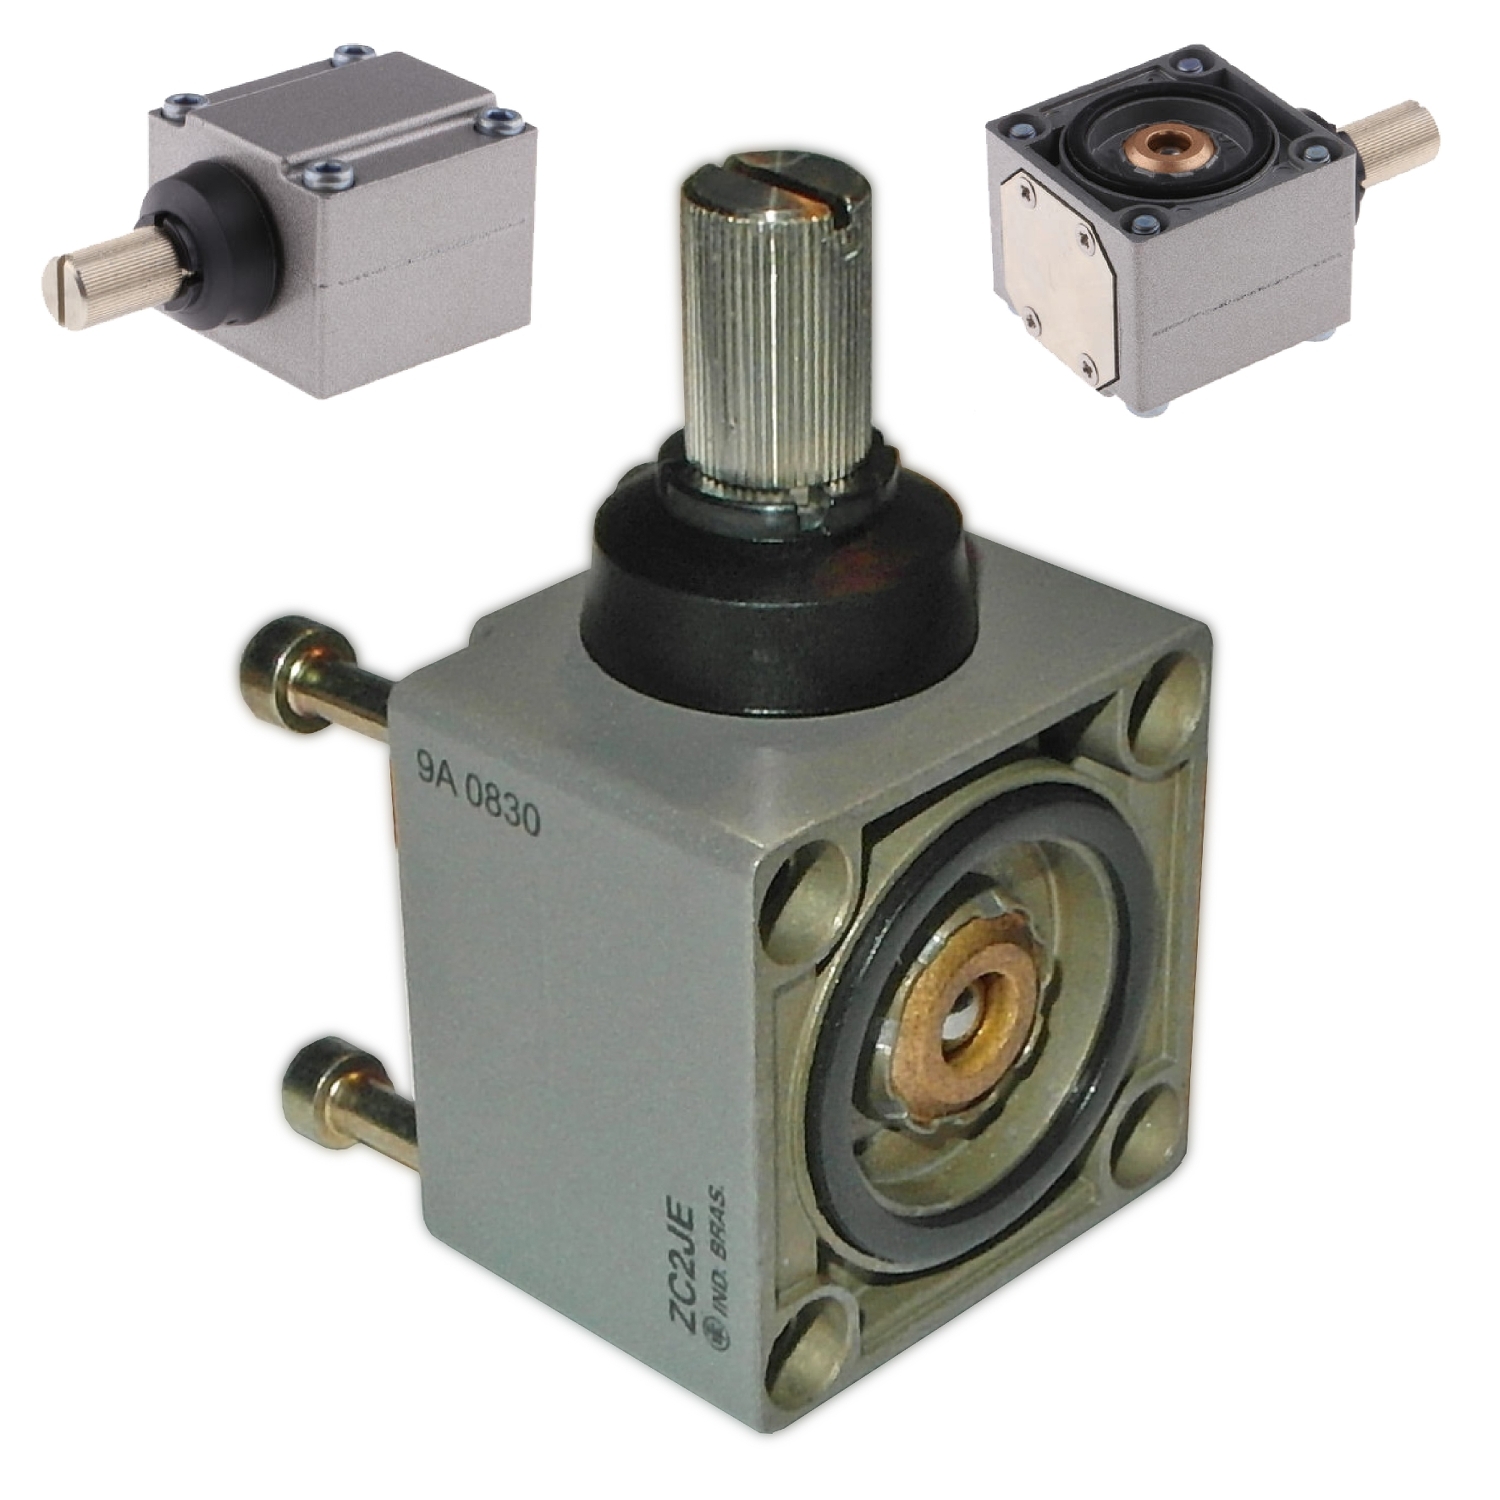 Limit switch head, Limit switches XC Standard, ZC2J, without lever spring return left or right actuation